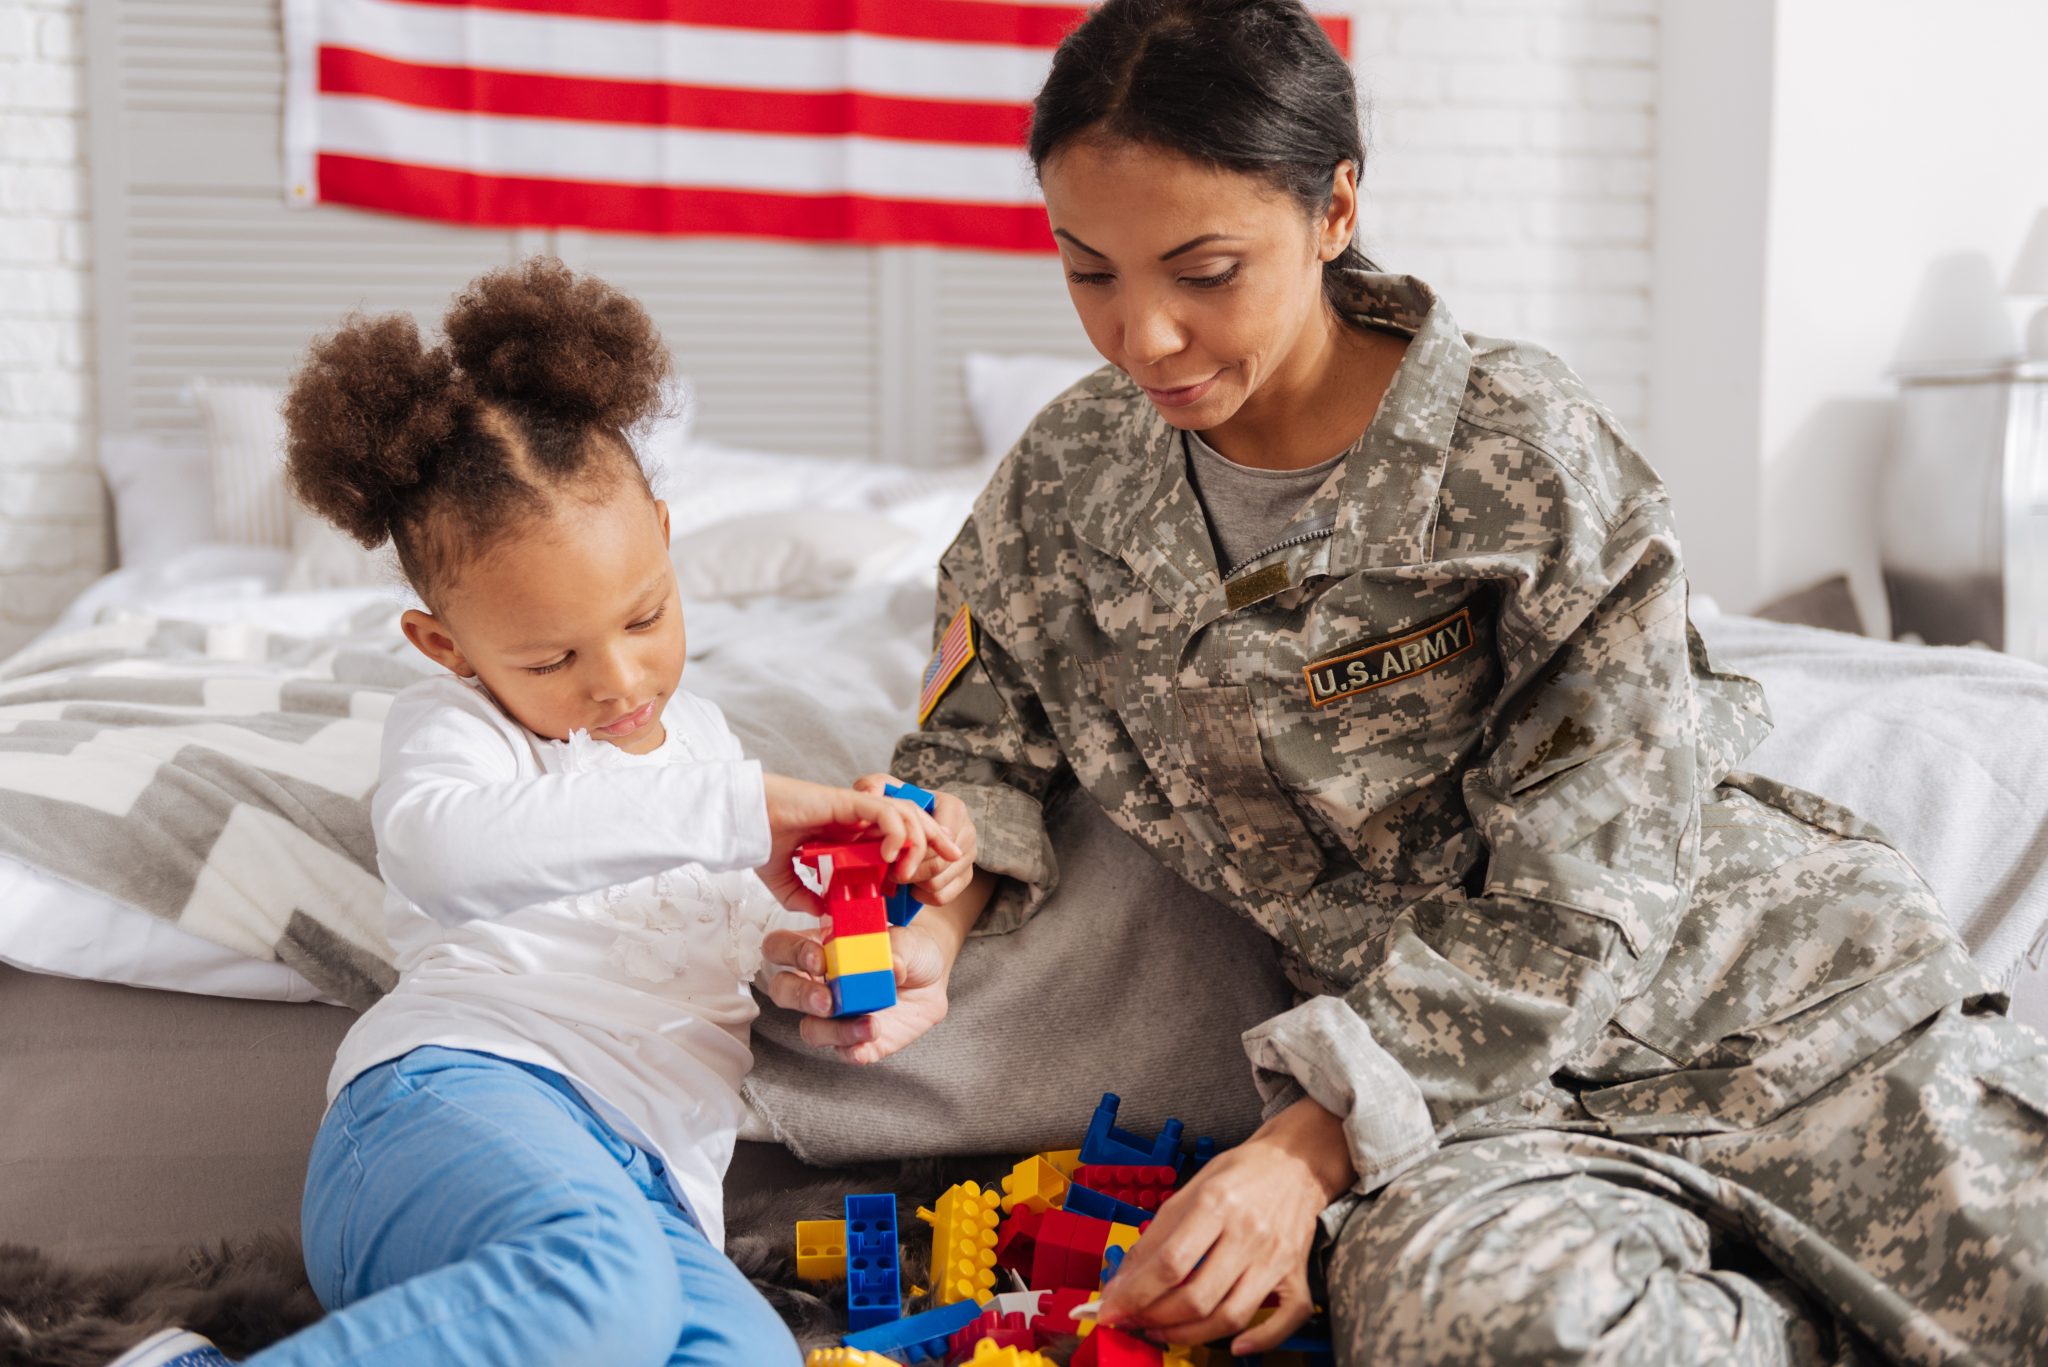 Service member and child build building blocks on iStock tocether.